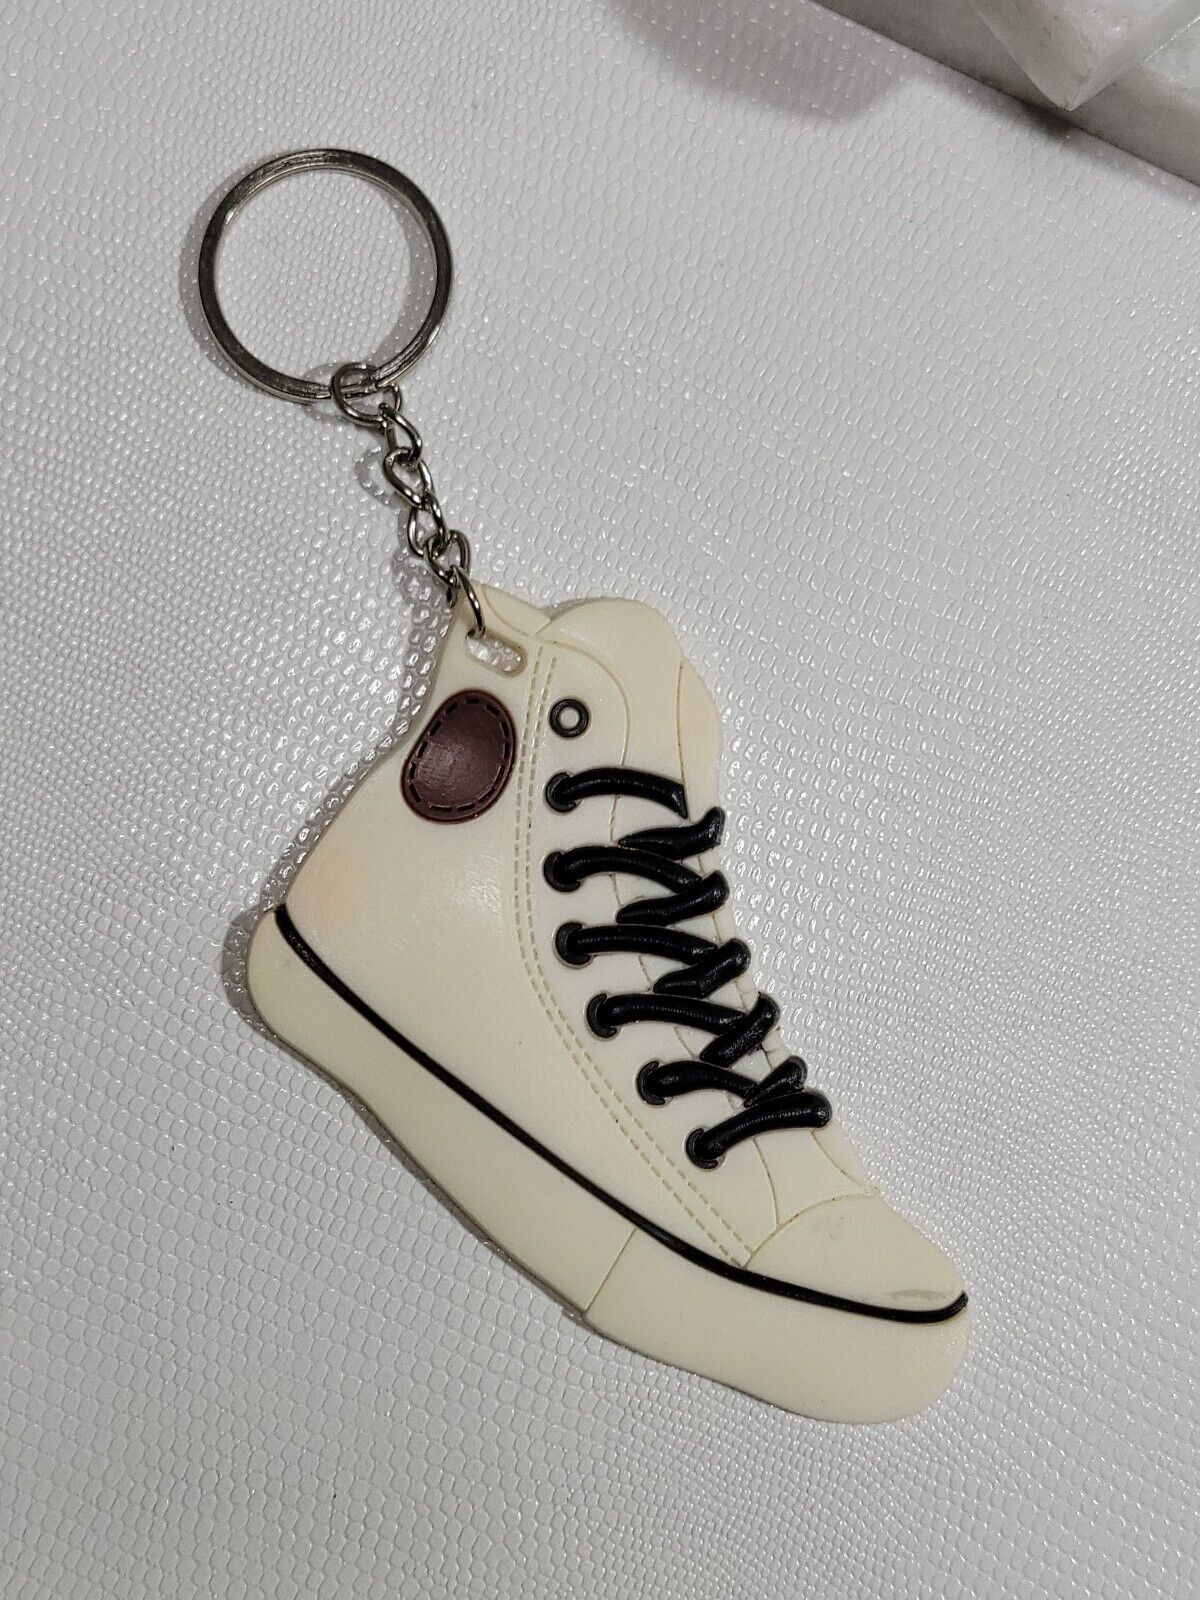 Vintage Converse Chuck Shoe Rubber Keychain - Rare vintage new with defects 